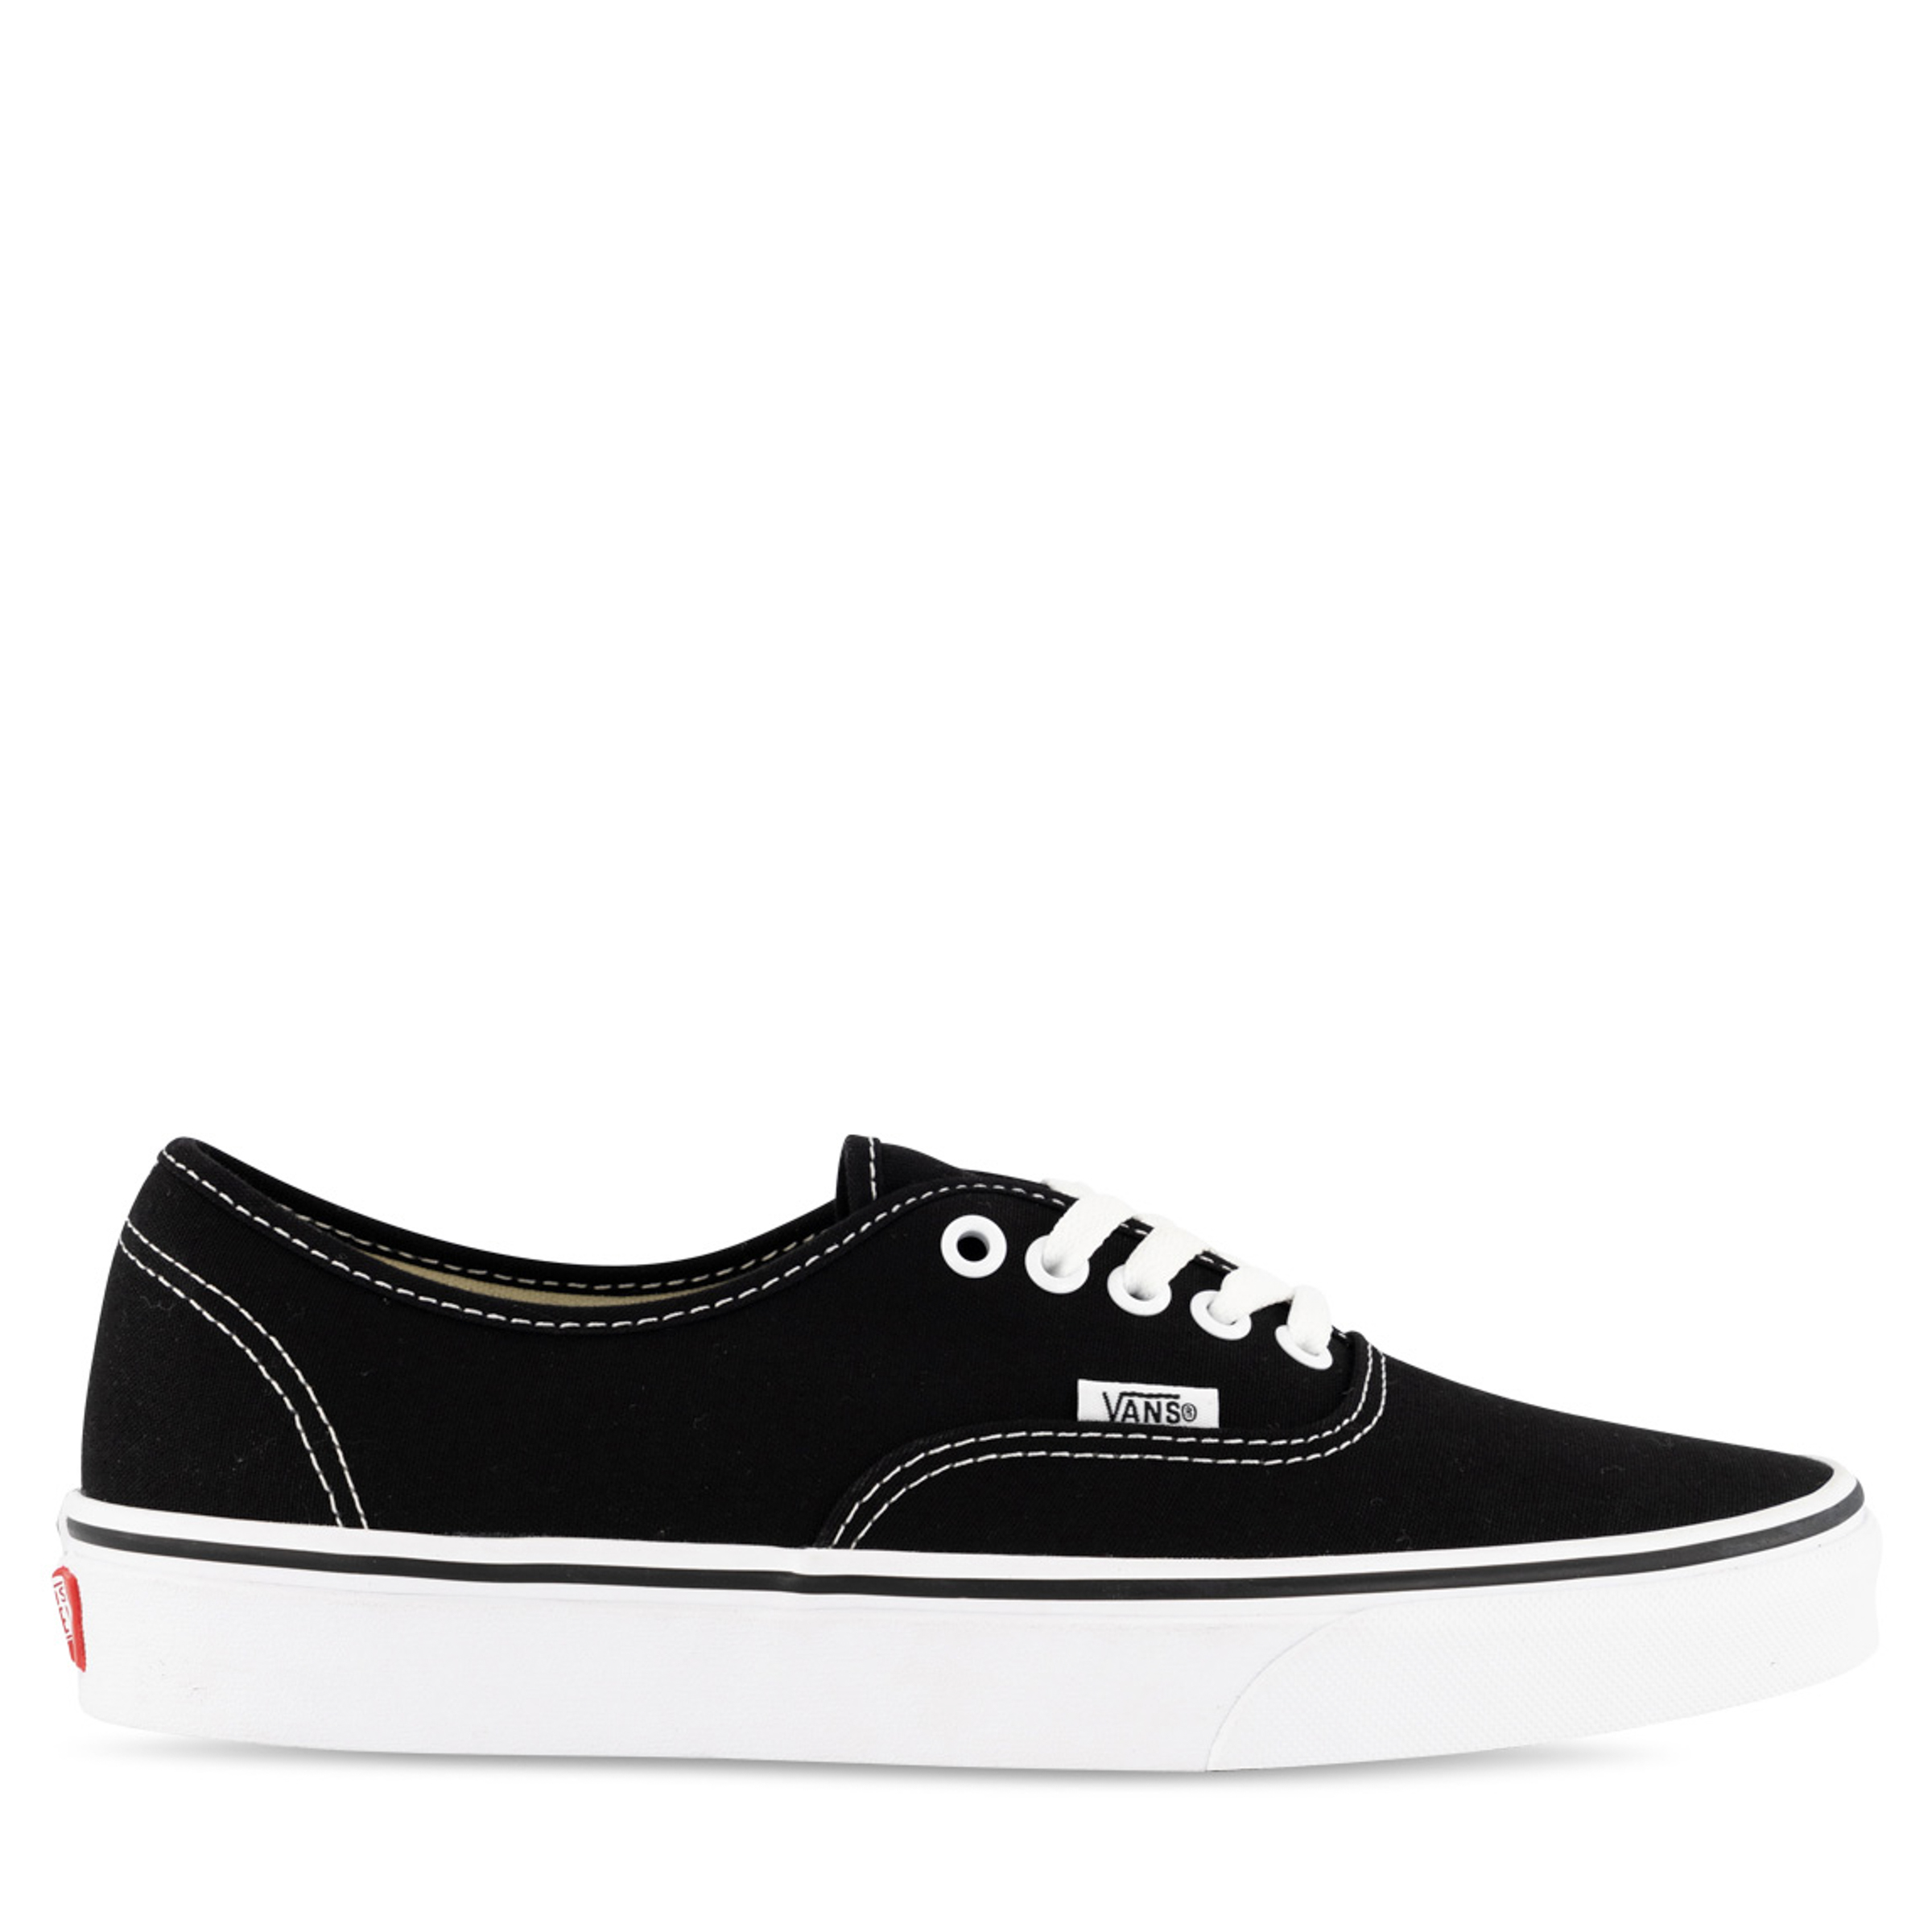 where to buy vans shoes in sydney